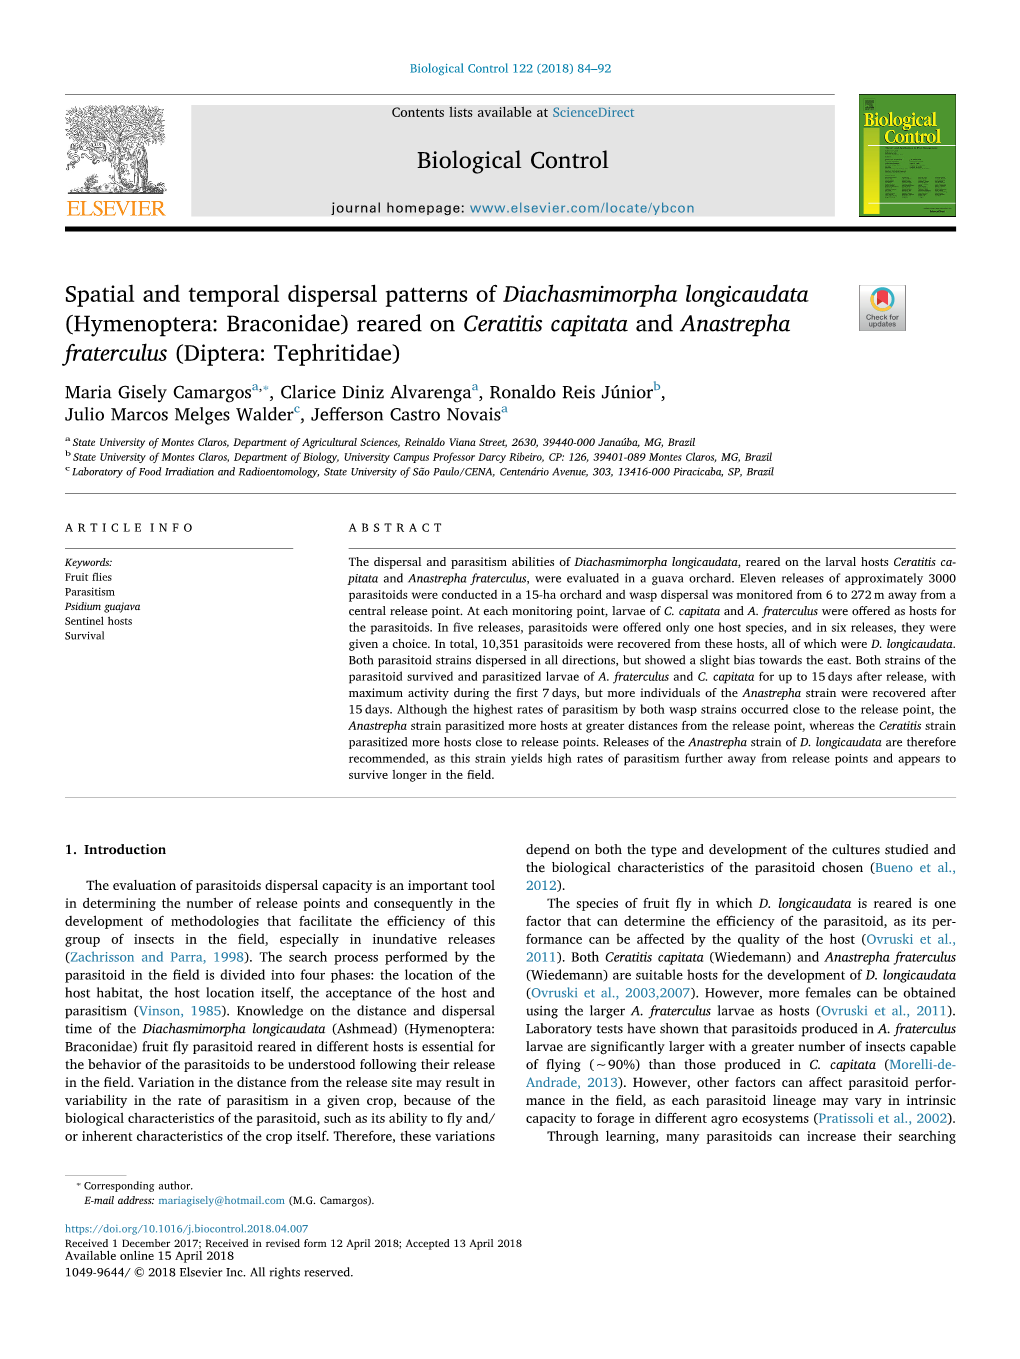 Spatial and Temporal Dispersal Patterns of Diachasmimorpha